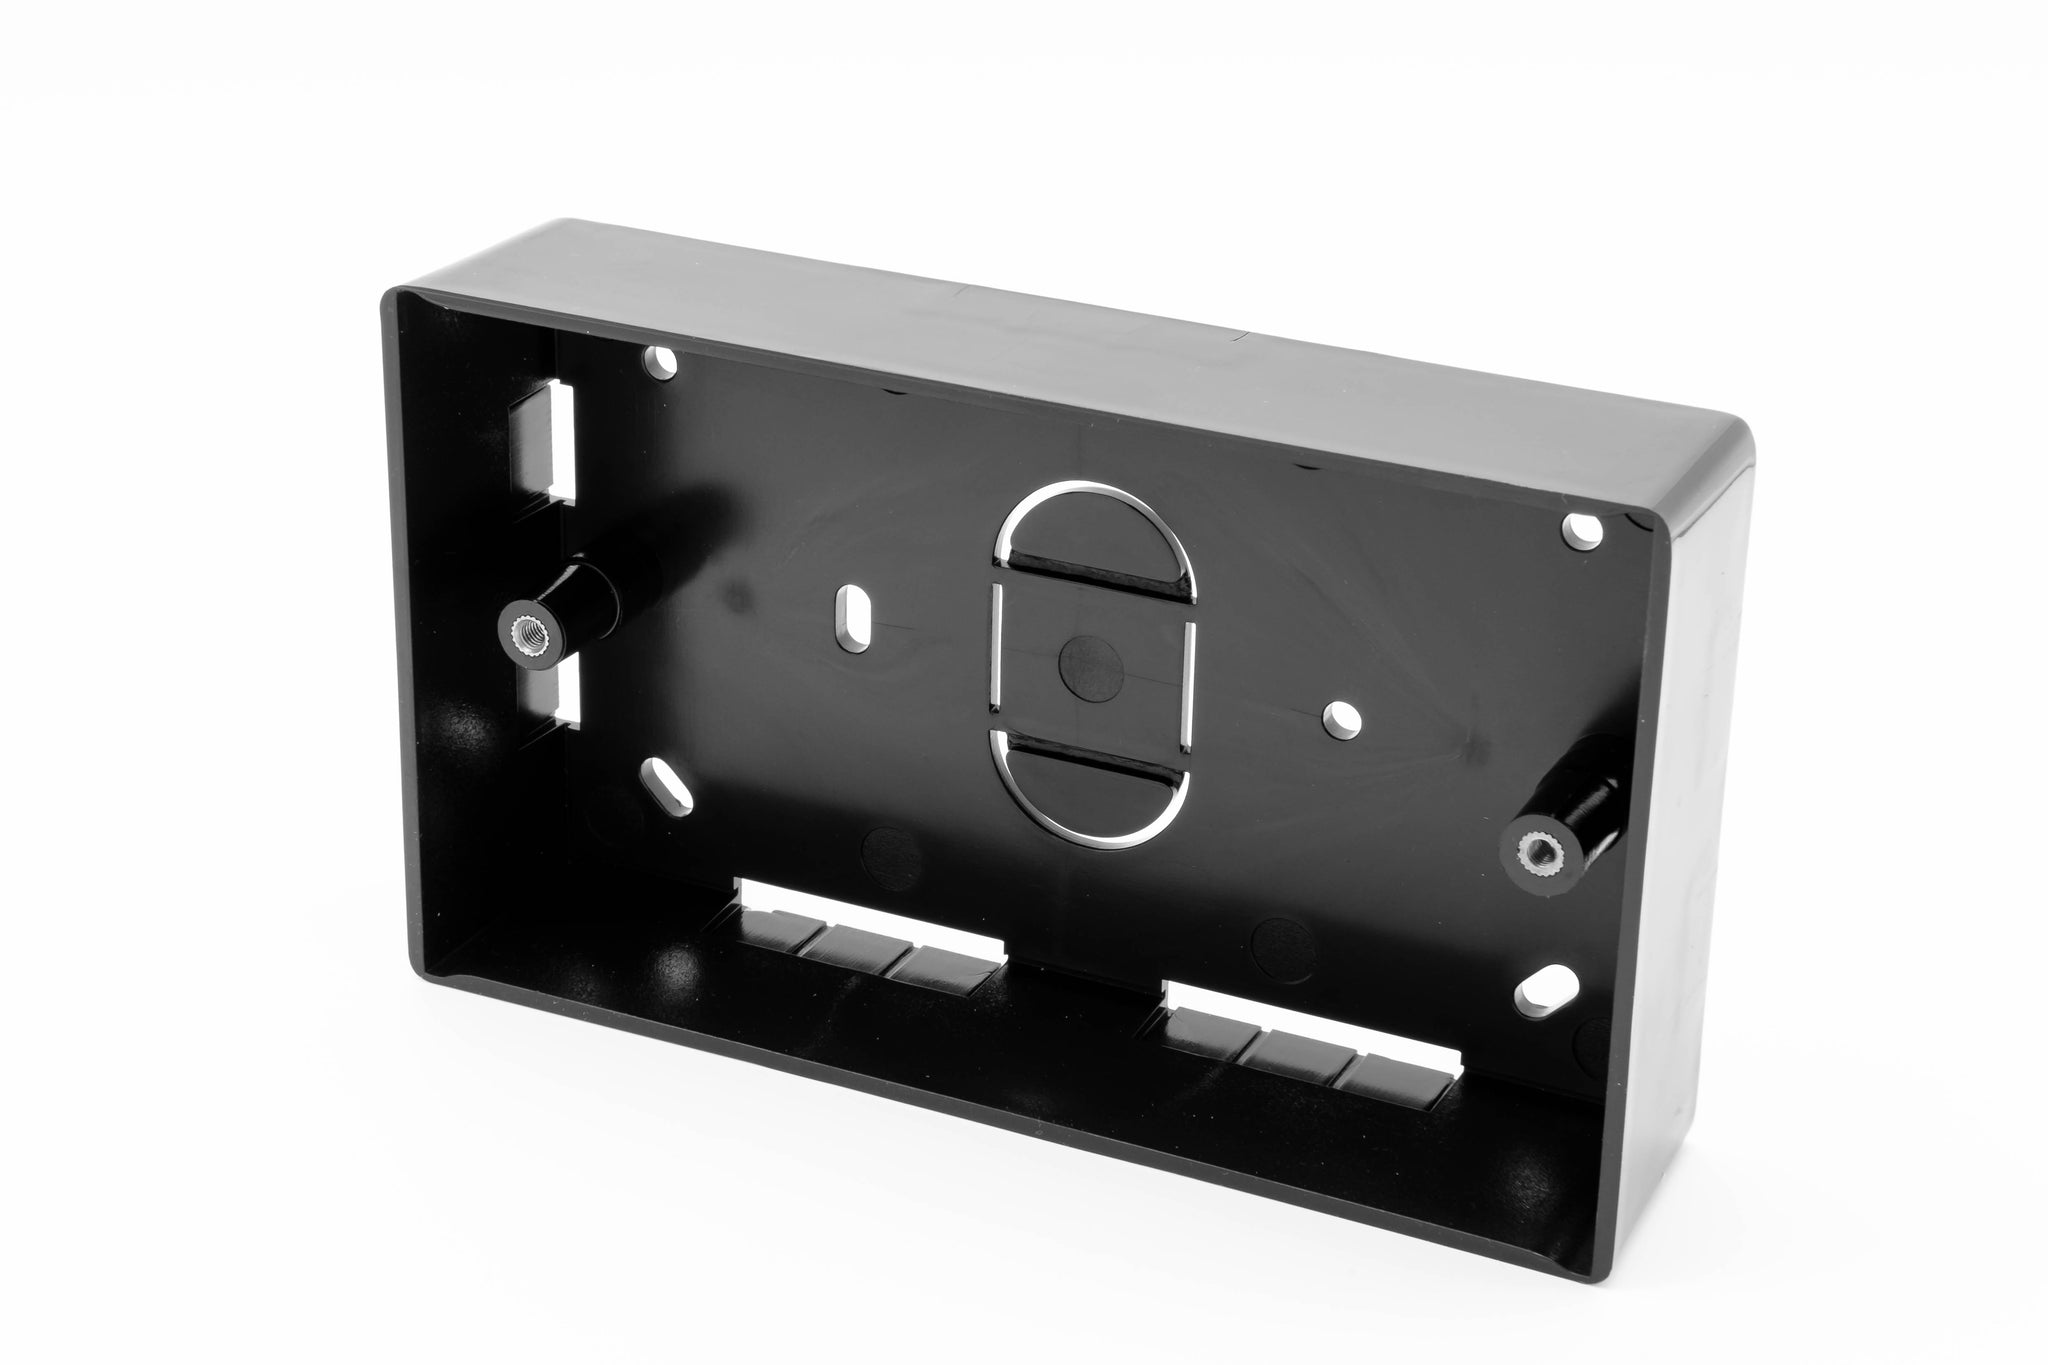 Surface Mount Double Gang Back Box - 32mm deep - Black (BB-DOUBLE-32-BLK)